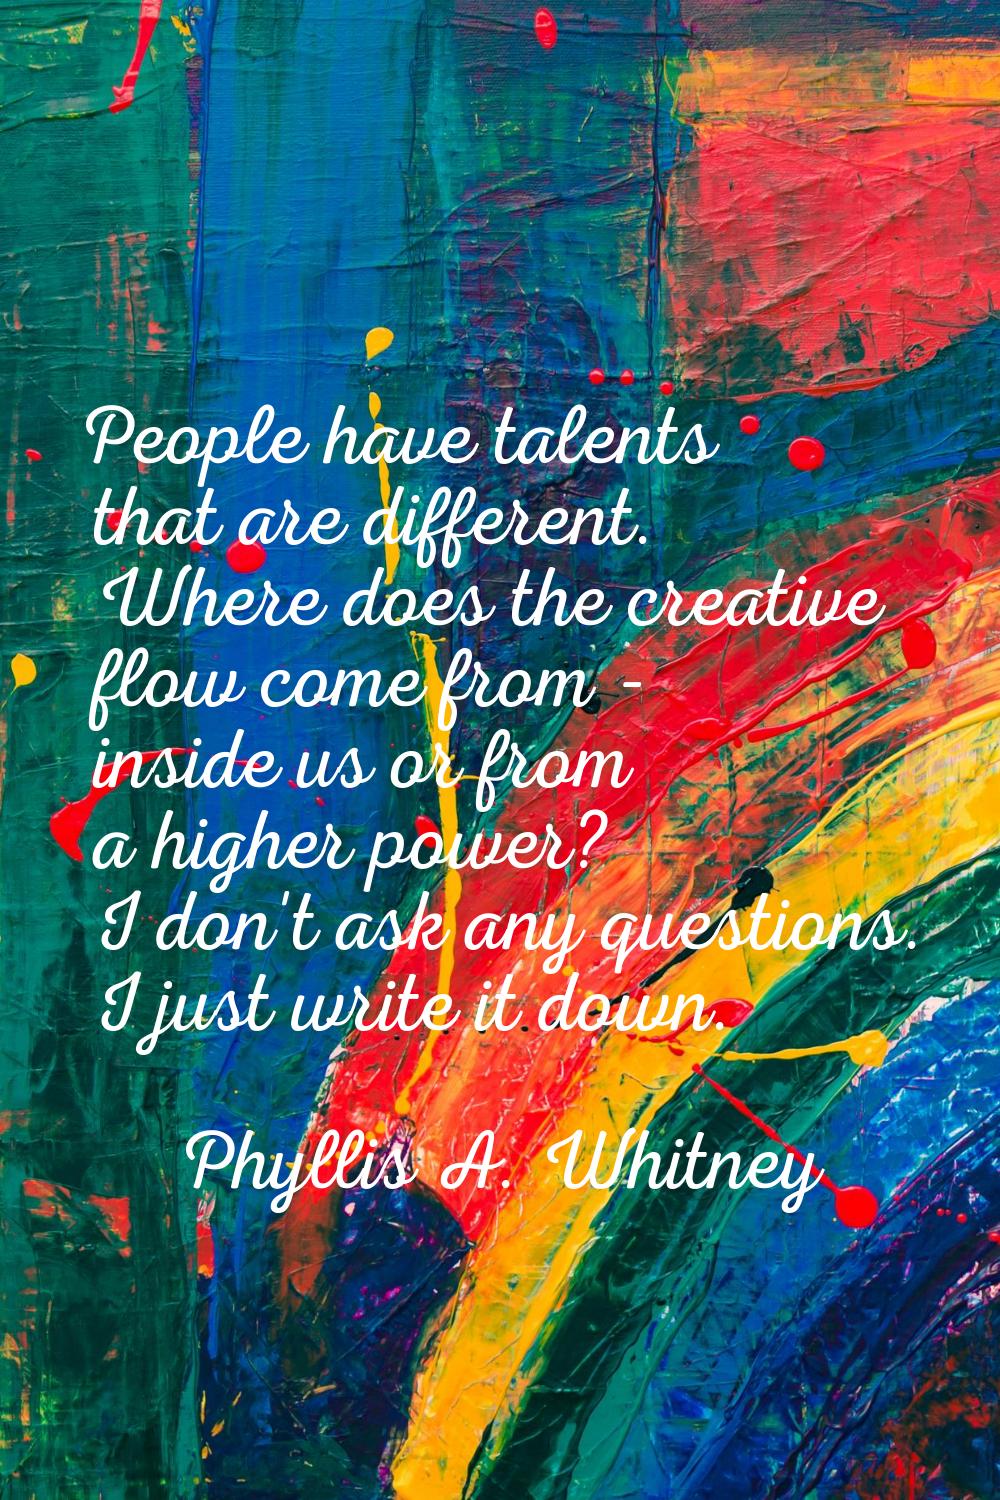 People have talents that are different. Where does the creative flow come from - inside us or from 